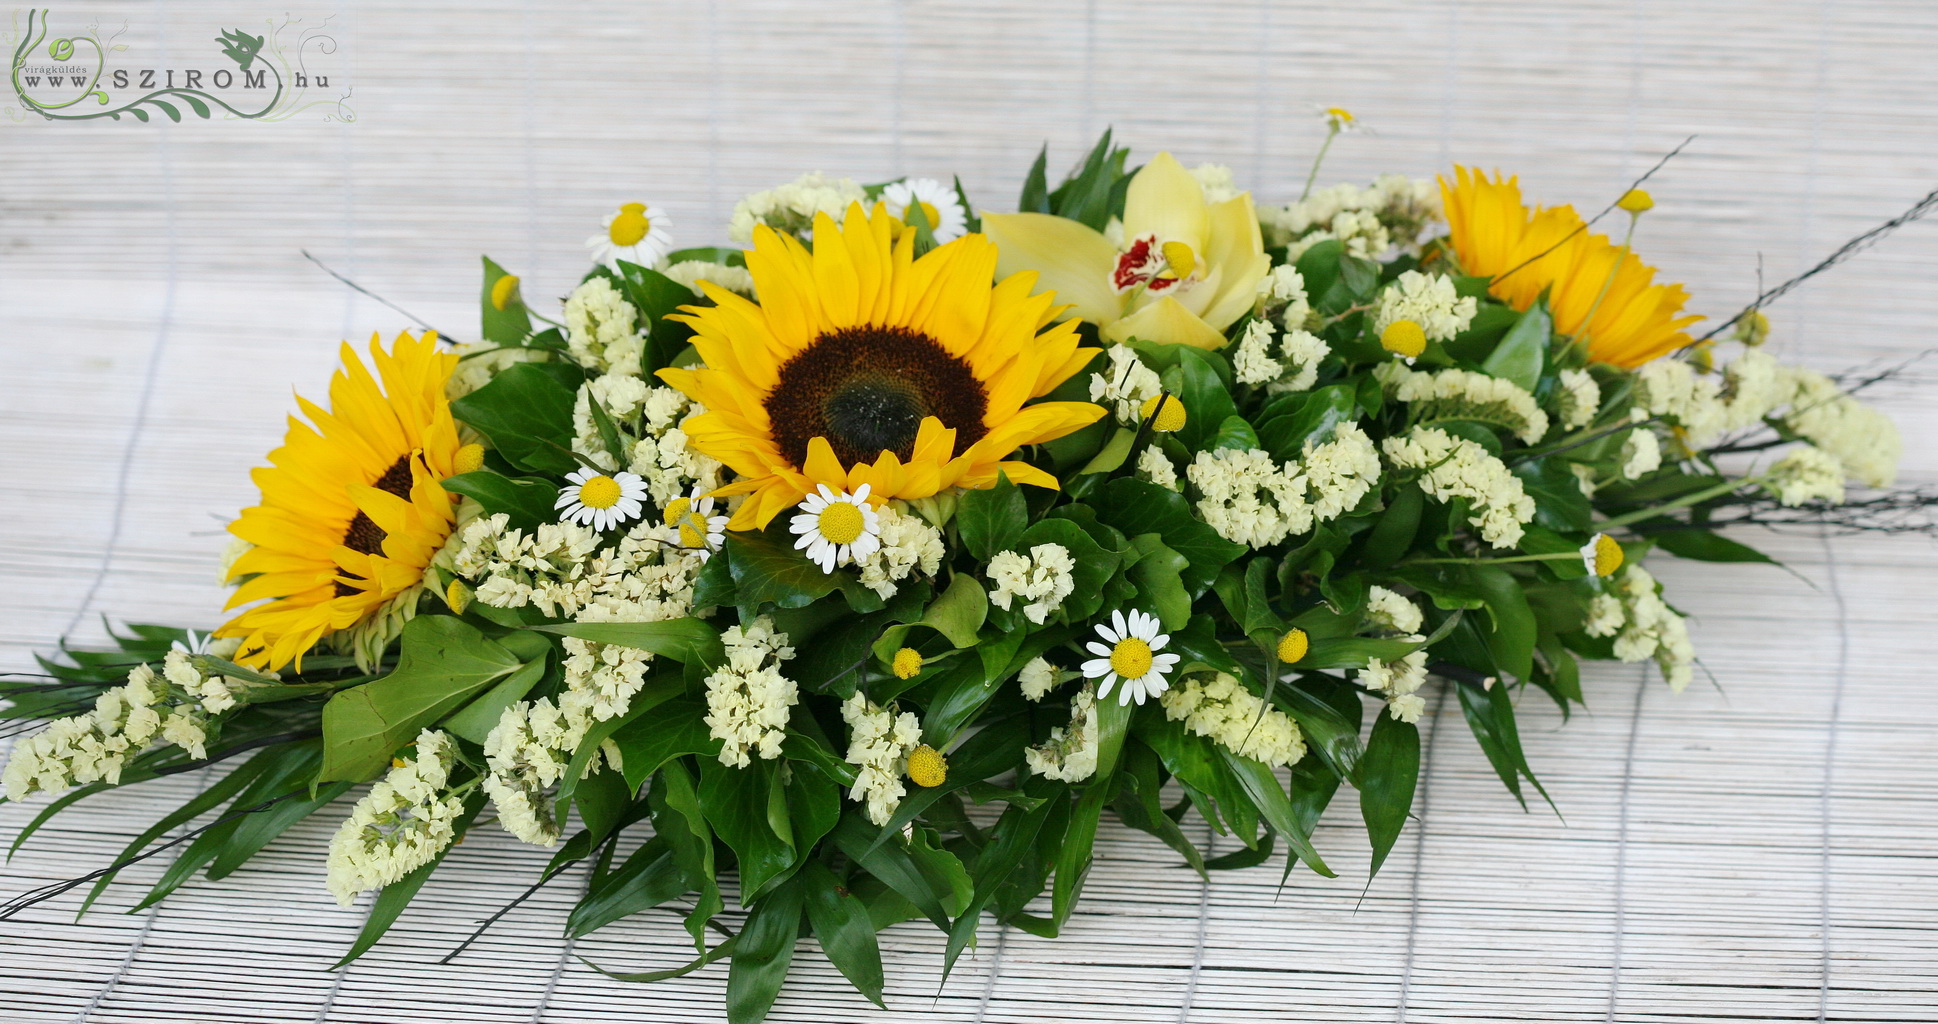 flower delivery Budapest - Main table centerpiece with sunflowers and camomilles (yellow), wedding